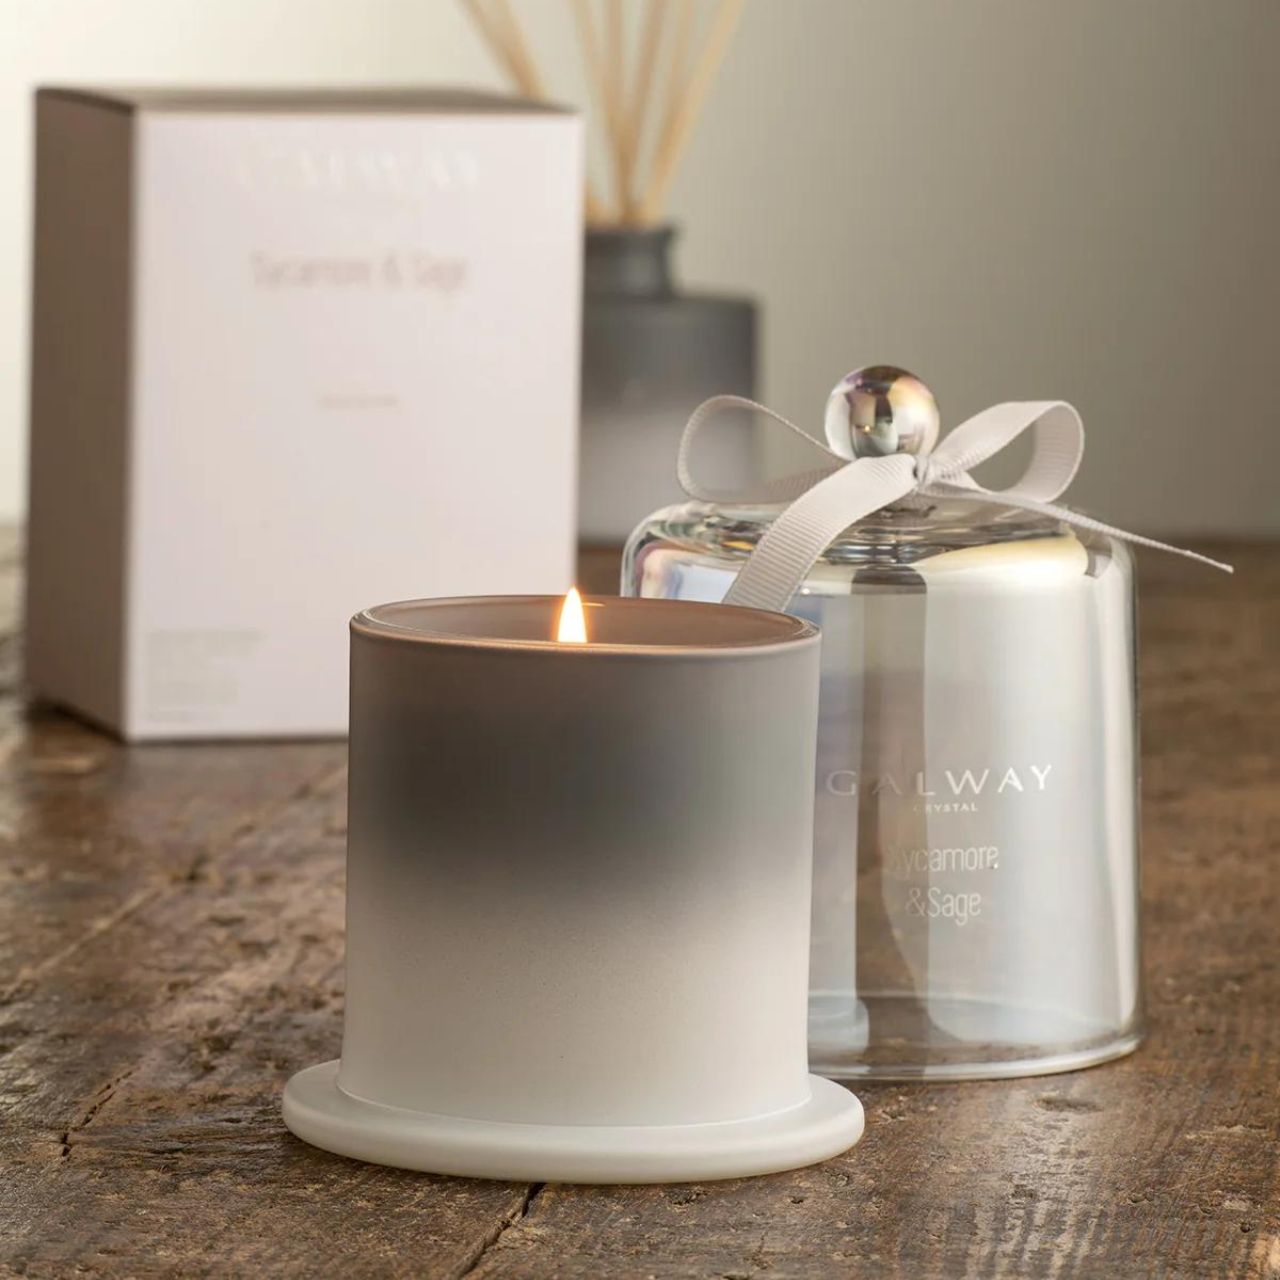 Sycamore & Sage Scented Bell Jar Candle  Transport yourself to a special place with the perfect fragrance for your home. Our Sycamore & Sage scent will transform any room and certainly set the right mood.